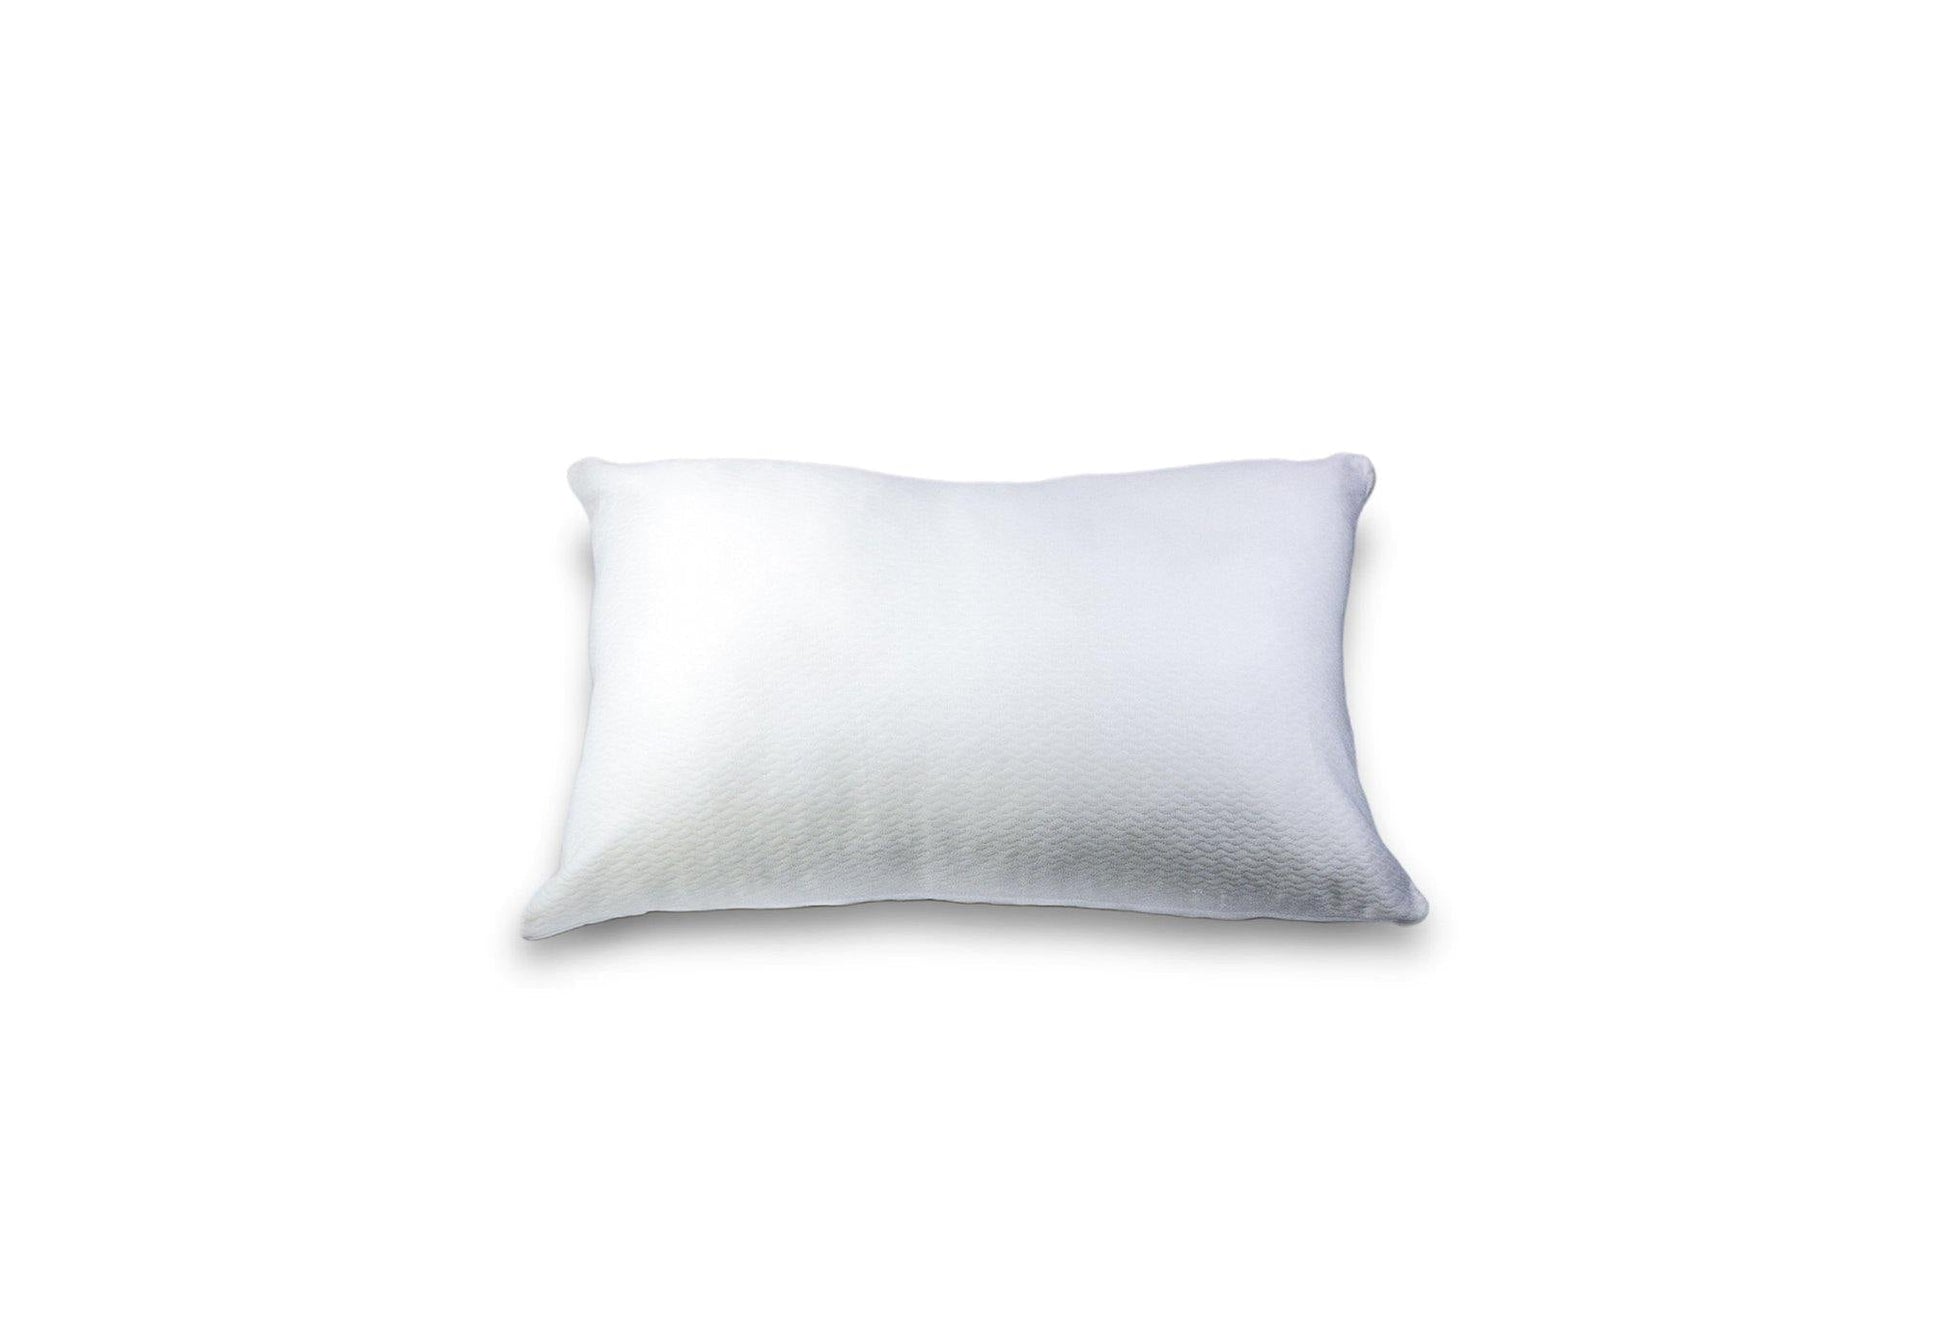 Alkhair Special Pillow Side View